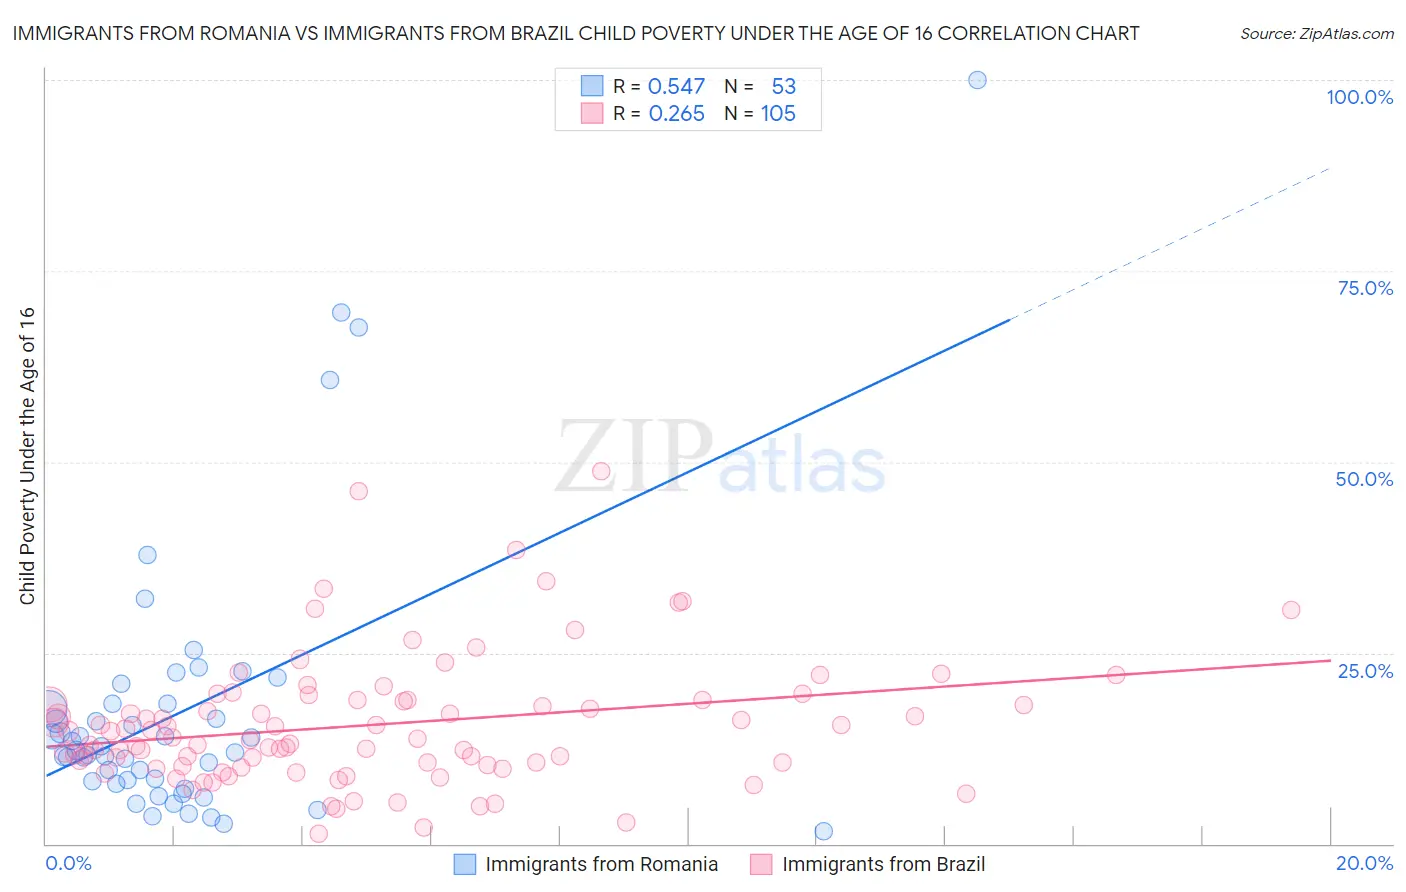 Immigrants from Romania vs Immigrants from Brazil Child Poverty Under the Age of 16